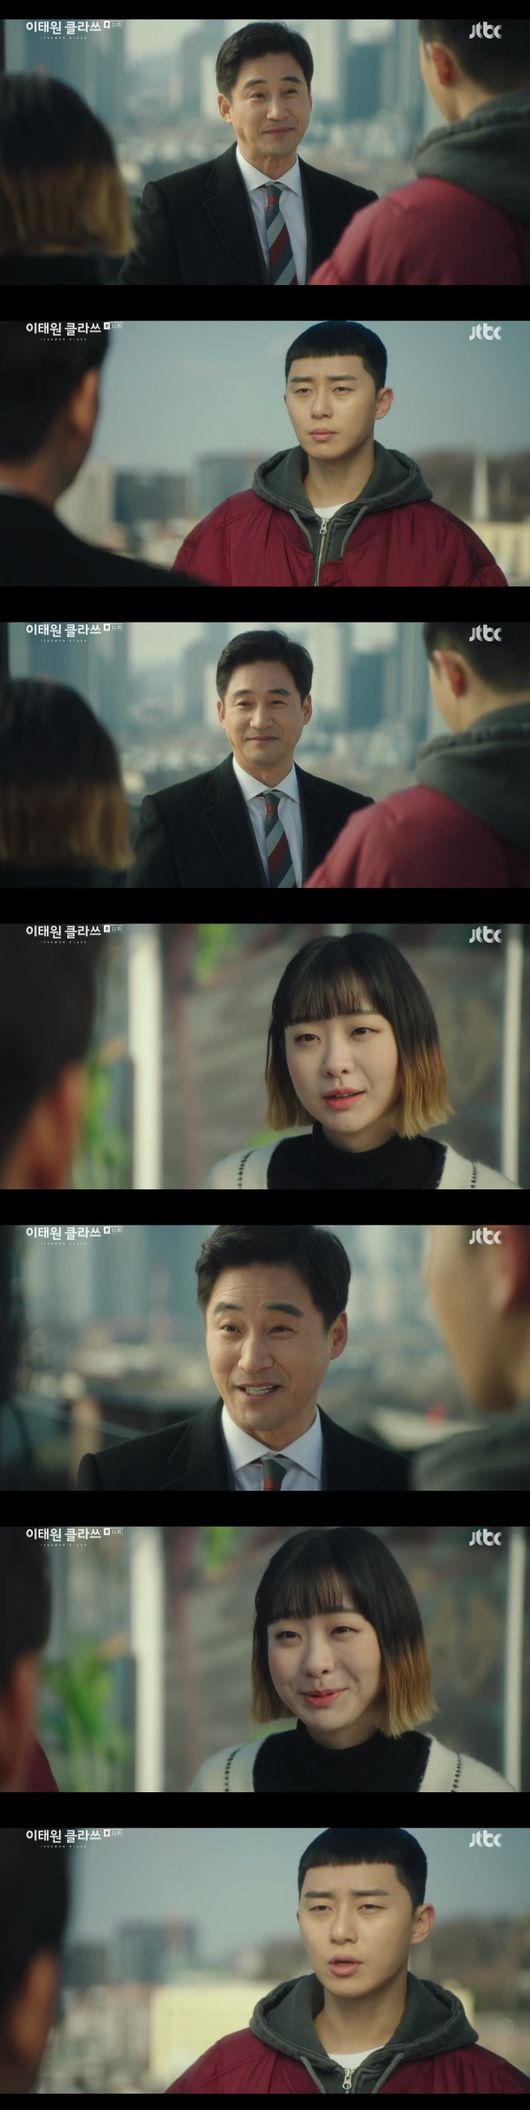 Winner to attract investmentPark Seo-joon on Itae One Klath is 10 billion KRWI succeeded in Franchise while receiving investment.On JTBCs Itae One Clath broadcast on the afternoon of the 28th, Park Seo-joon (played by Gwangjin director Kim Sung-yoon) met Do Jung-myeong (played by Jeon No-min) who wants to invest in Sanbam, which ranked first in the Miniforce.Roy has decided to accept Do Jung-myeongs offer.Unlike the Roy, who wants to increase the number of stores one by one, the Seo-young Lee, who builds a proper system and makes several franchises.Joe-yol Lees words about when to catch up with the house made sense.I comforted Joe-yol Lee because I believe you more than anyone else.After a lead investment of 5 billion won by a well-known holding company, the people who recognized the value of the night will continue to invest...The franchisee has 20 people gathered. The Winner of the Roy has begun.JTBC Itae One Clath captures broadcast screen